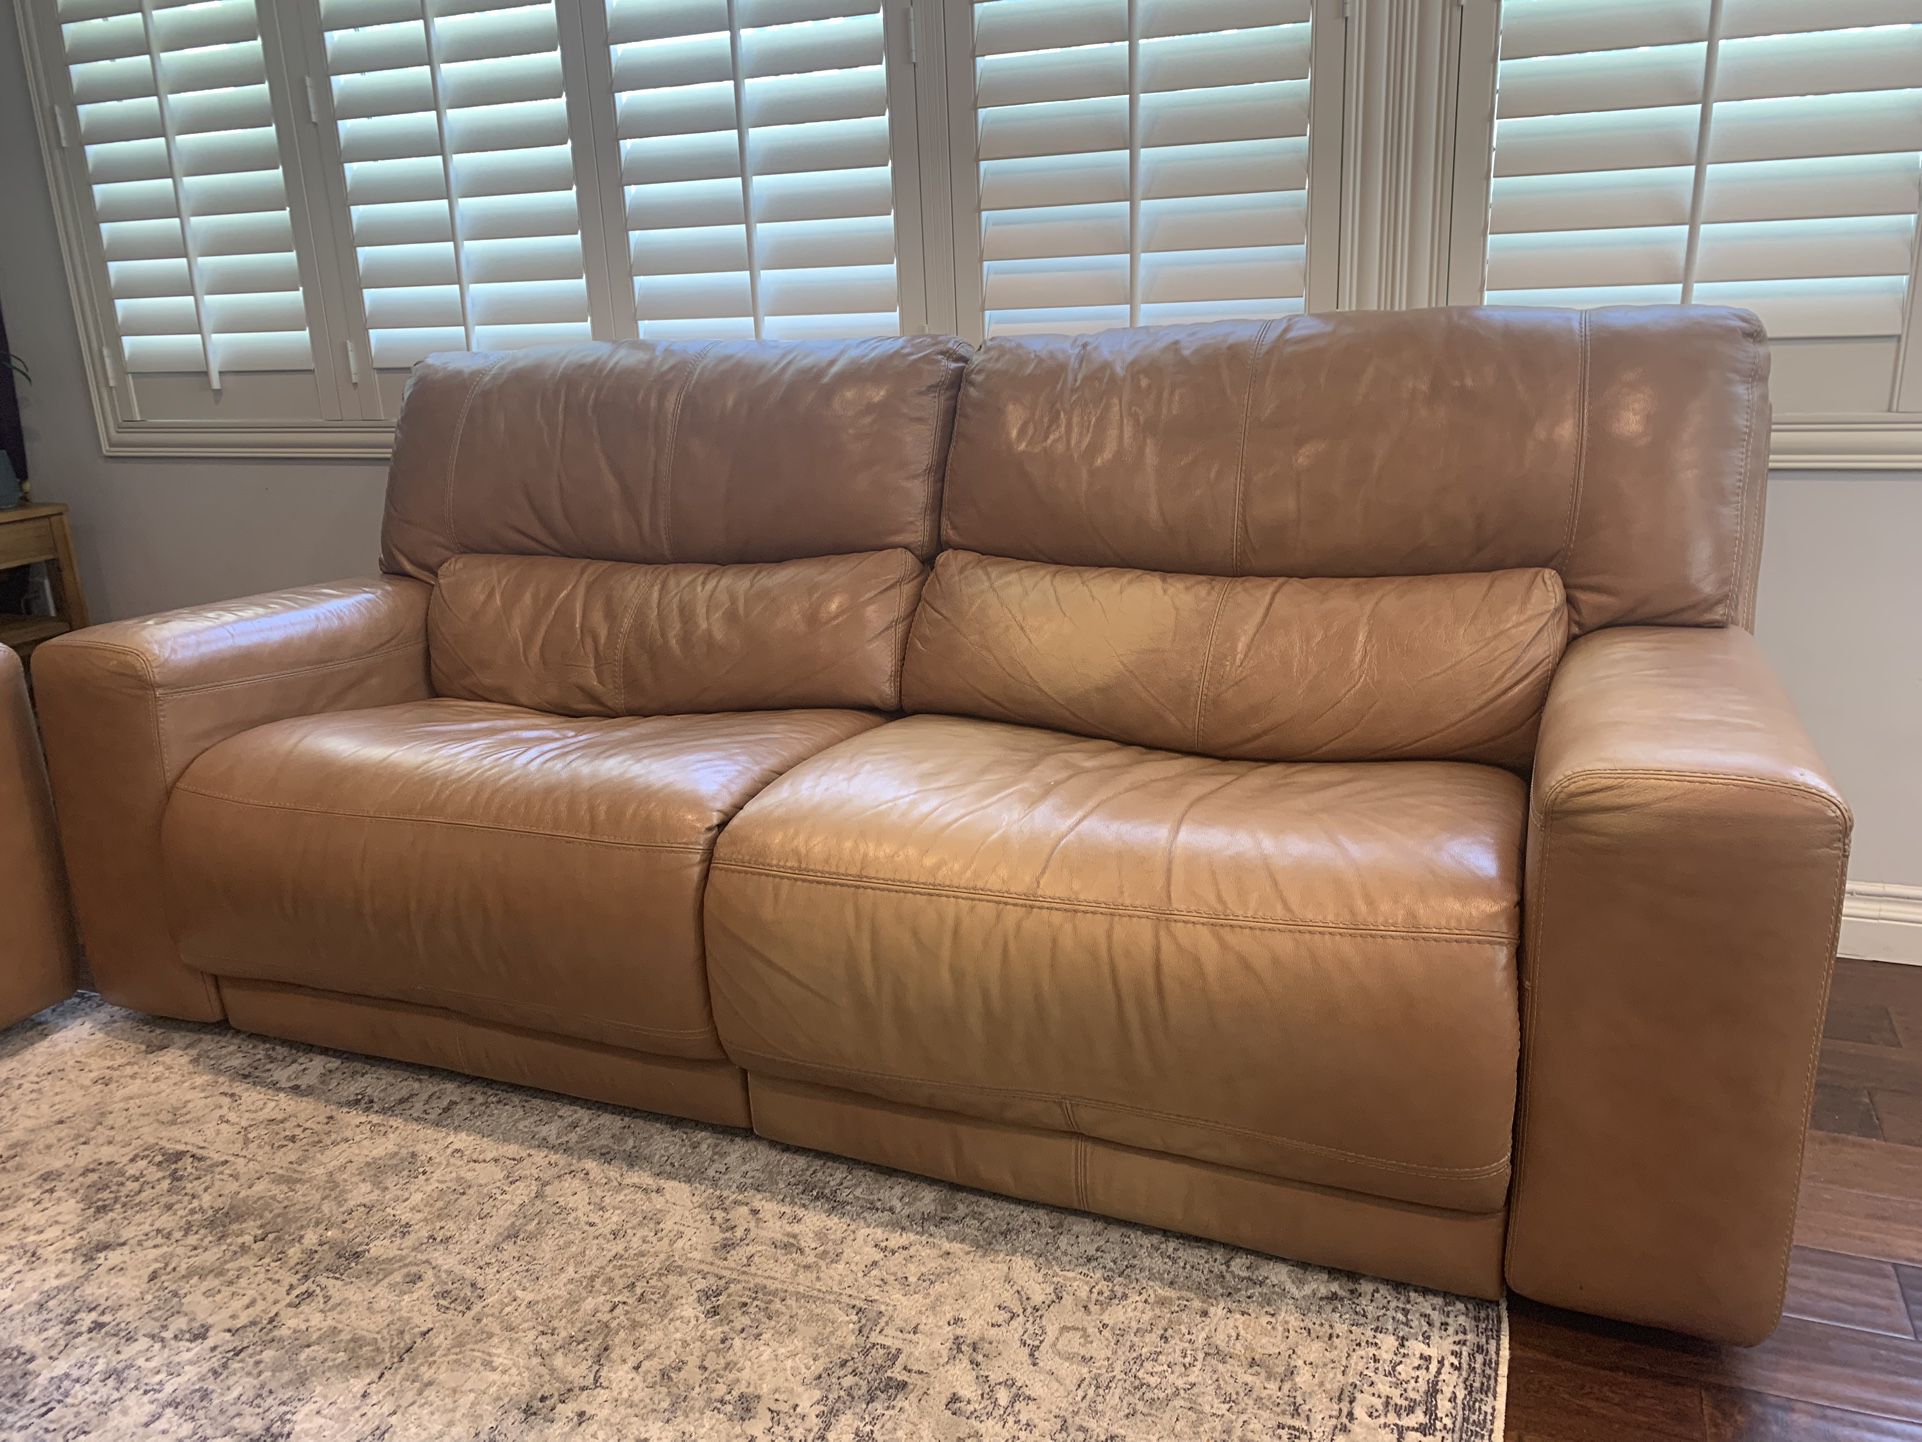 Leather Couches (full recliners, good condition)